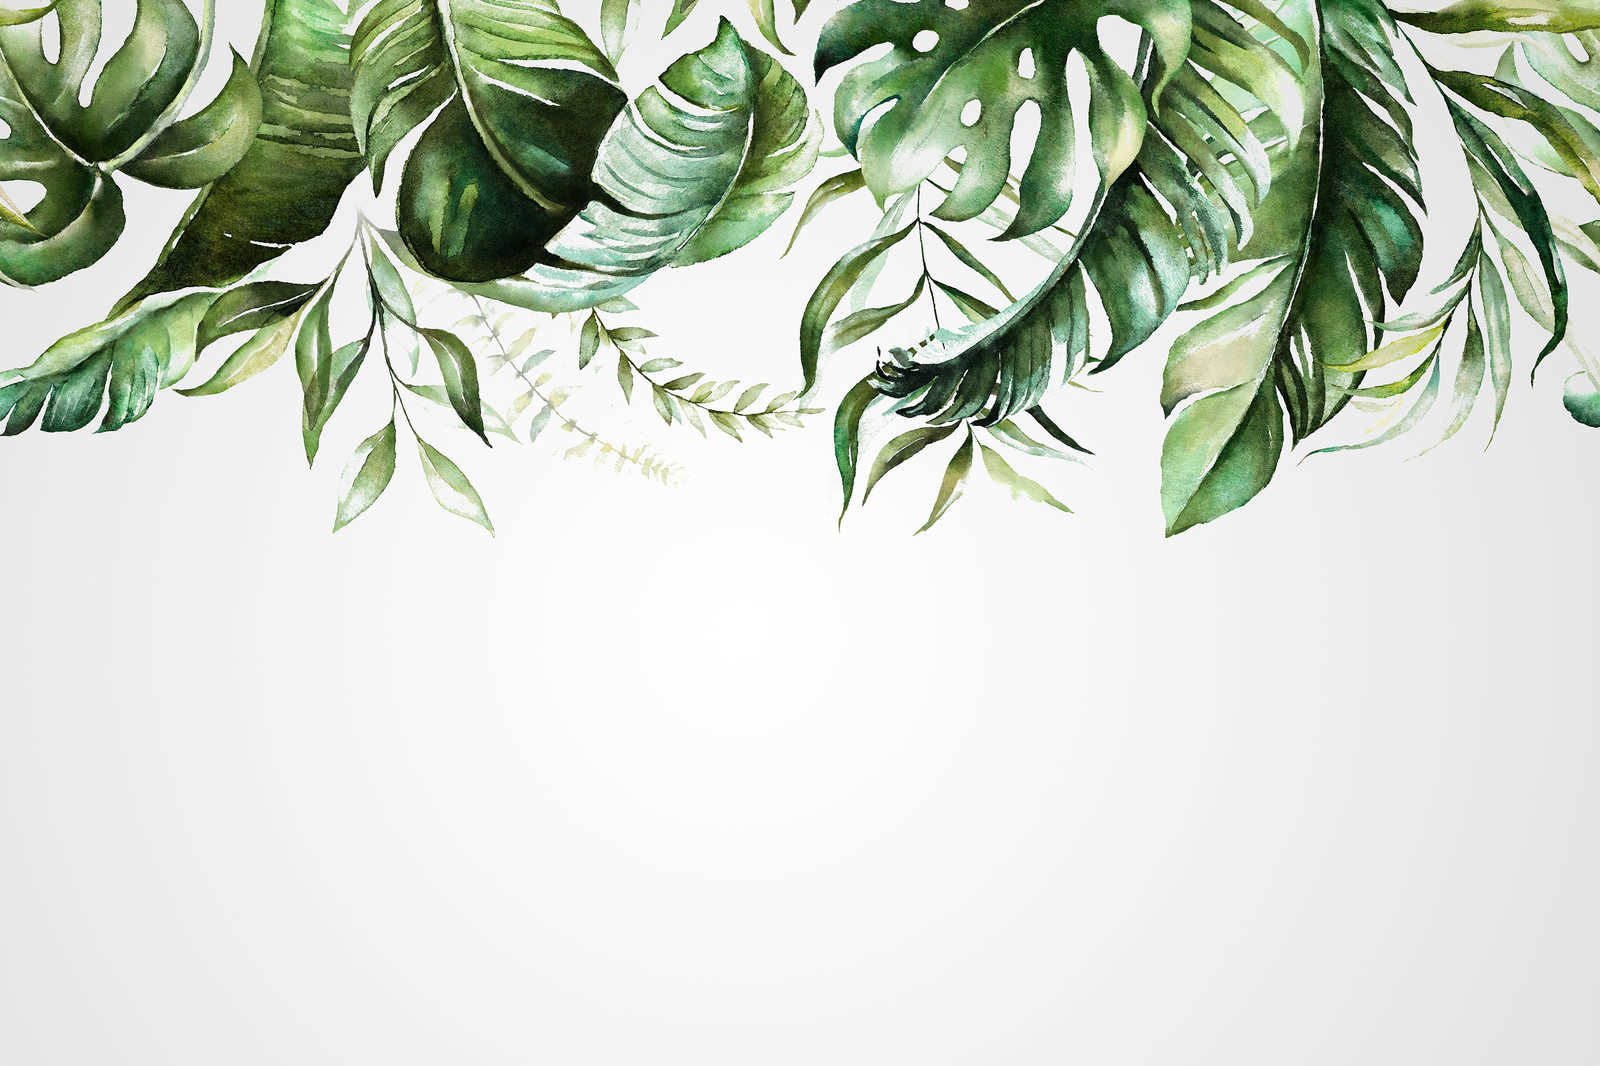             Canvas painting with tropical leaf tendrils on a wall - 0.90 m x 0.60 m
        